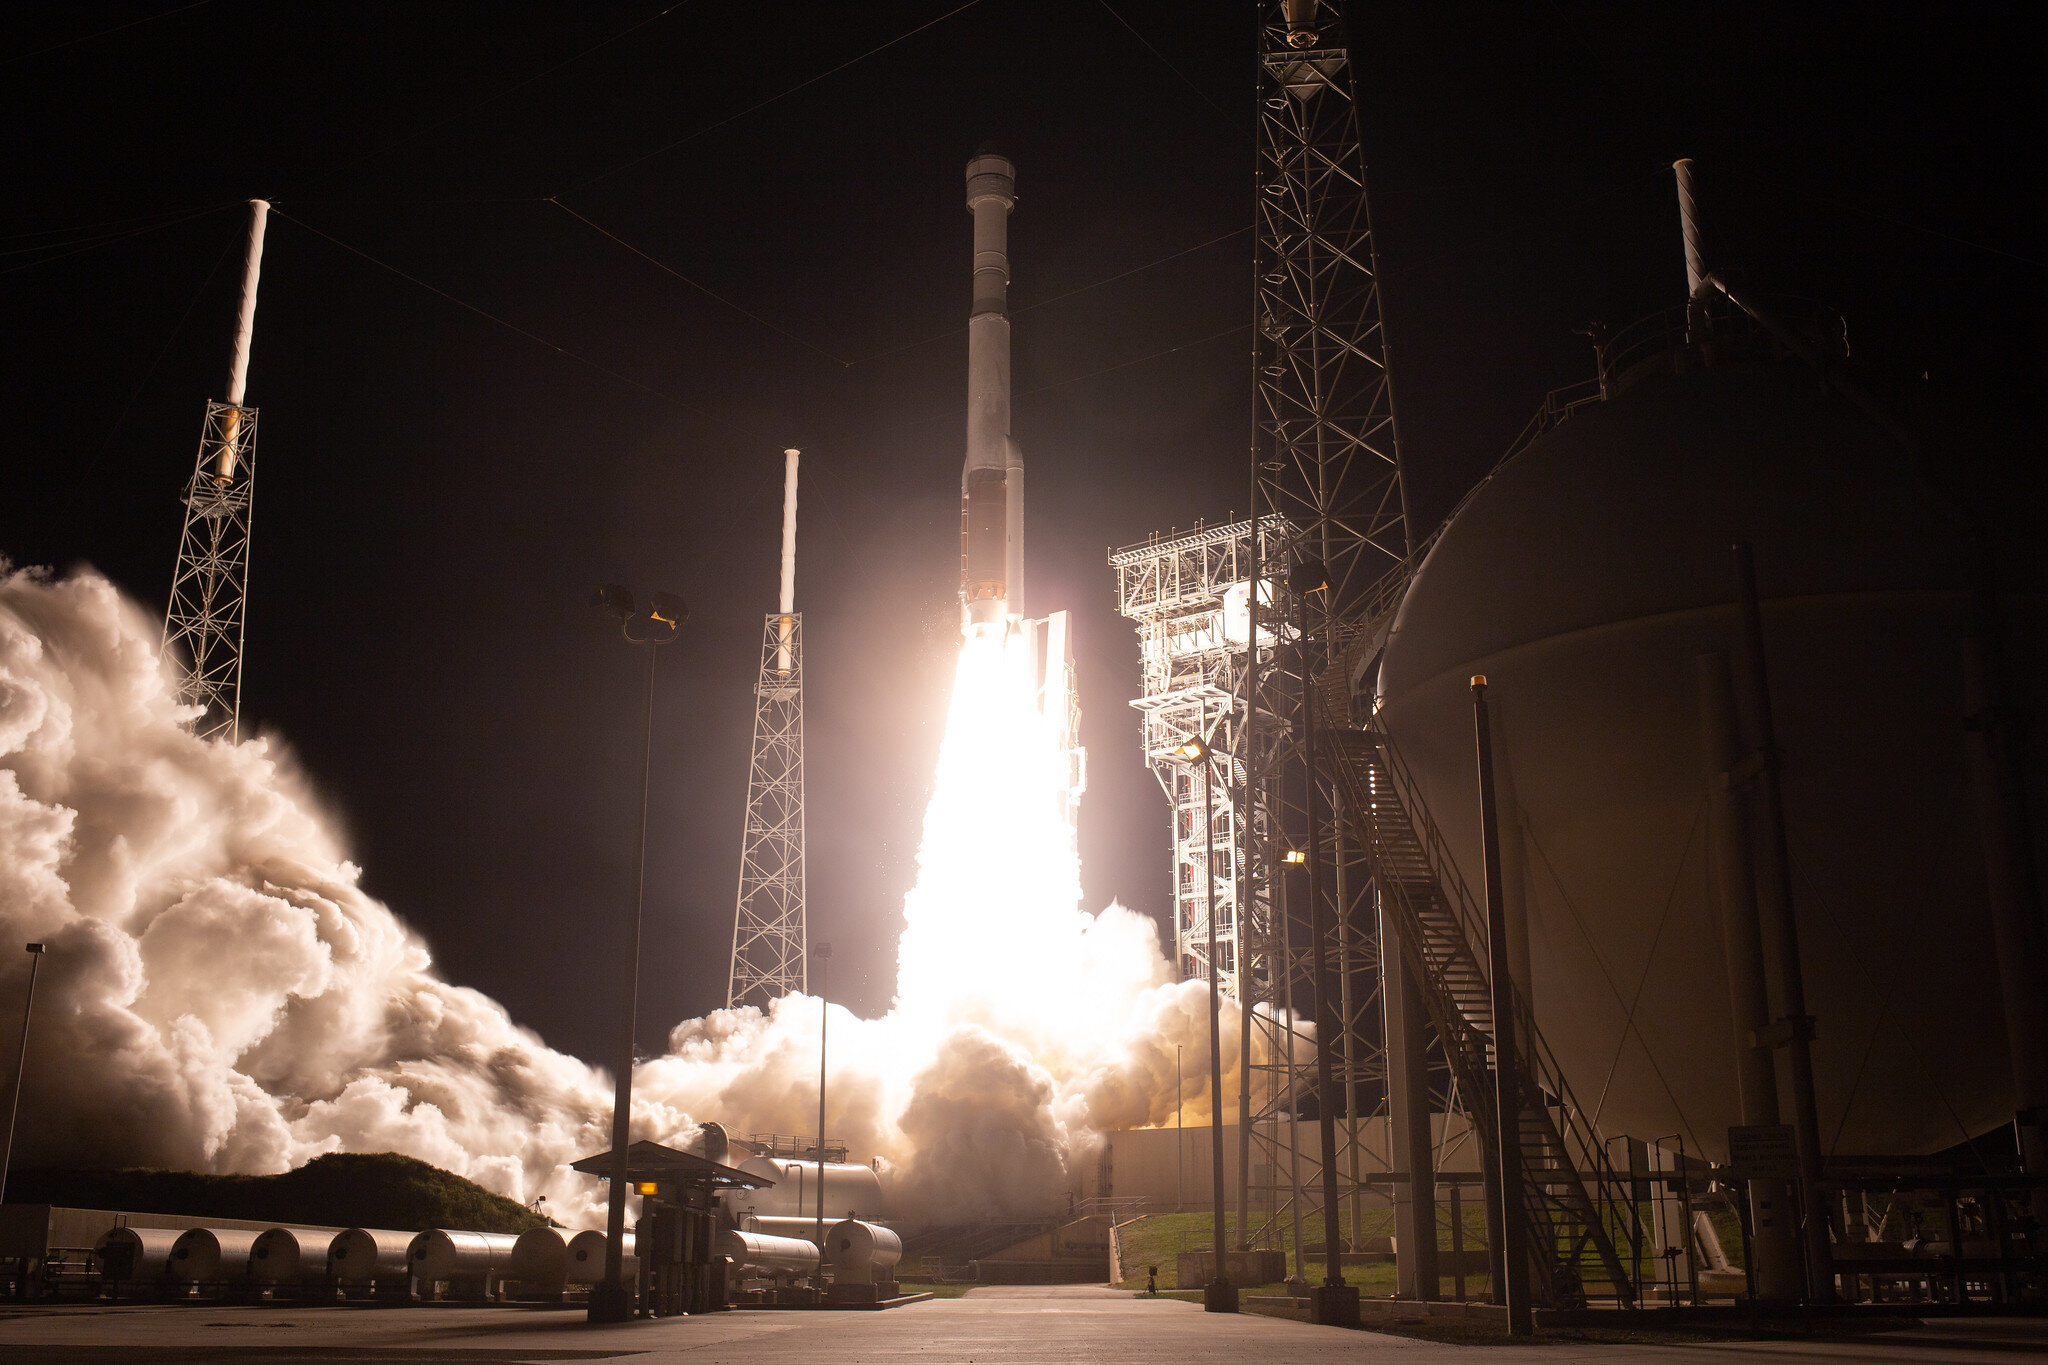  Starliner launched atop an Atlas 5 rocket in the pre-dawn hours of Dec. 20, 2019. Credit: NASA 